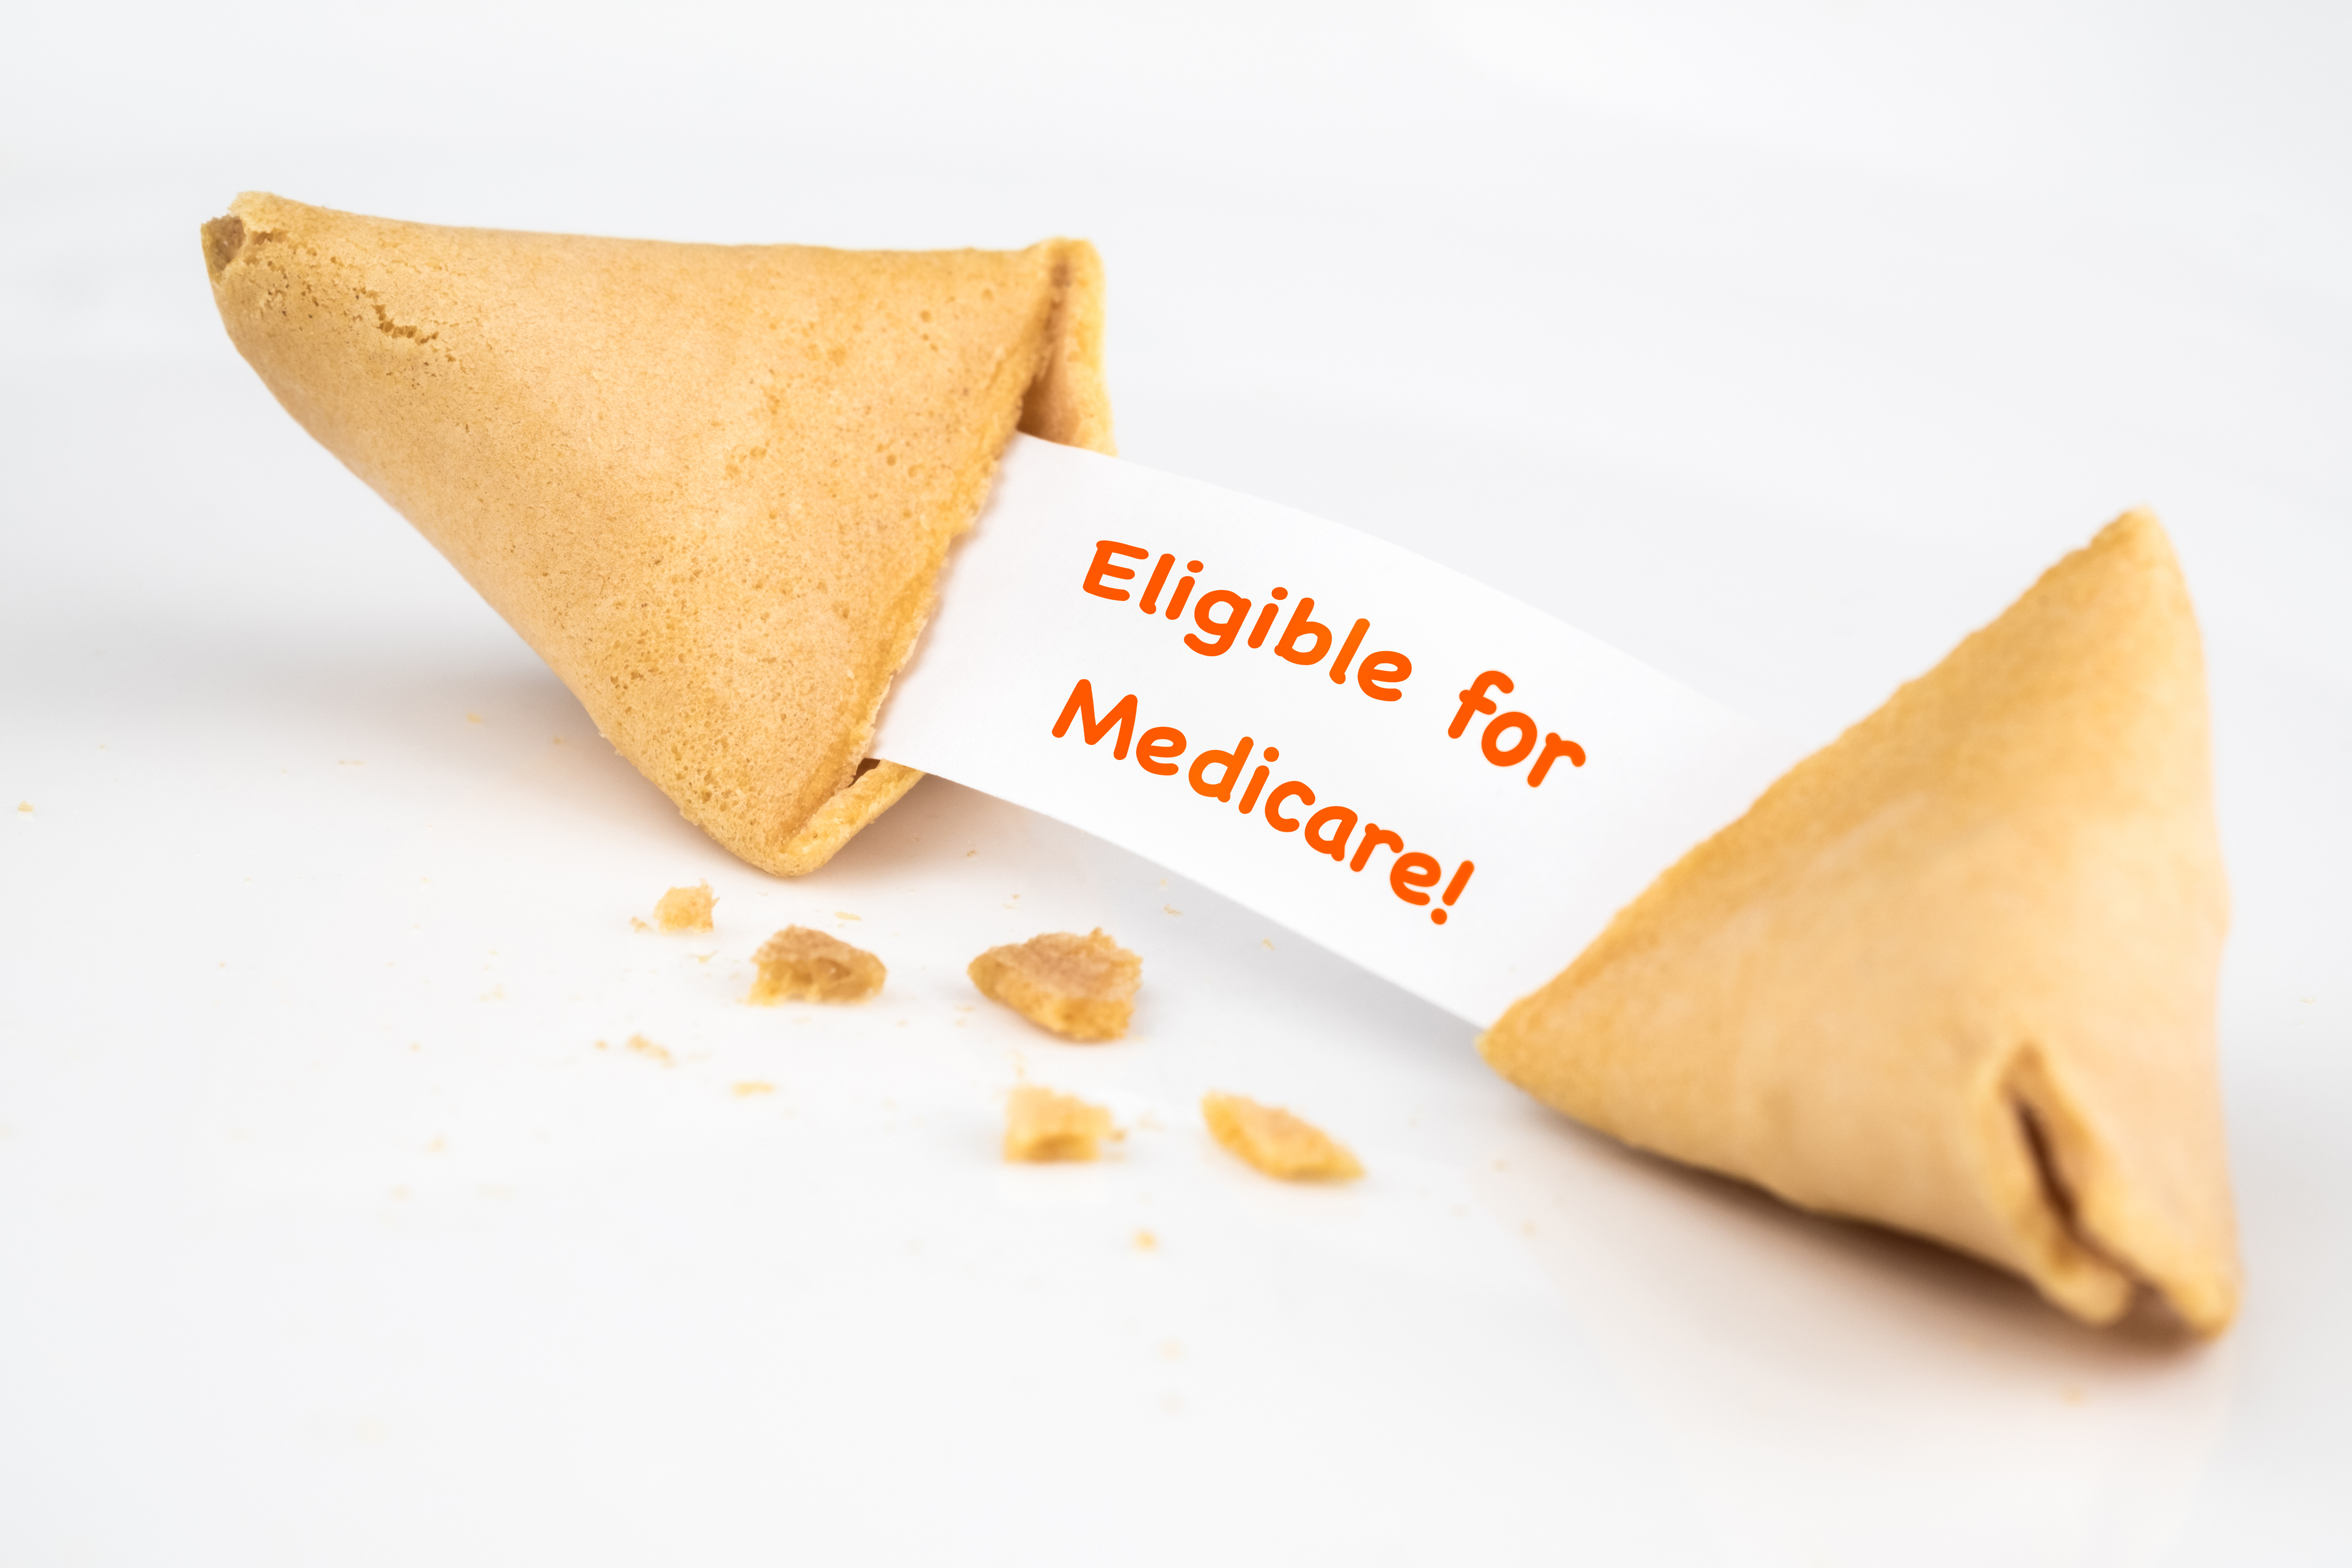 fortune-cookie-with-words-eligible-for-medicare-on-white-paper